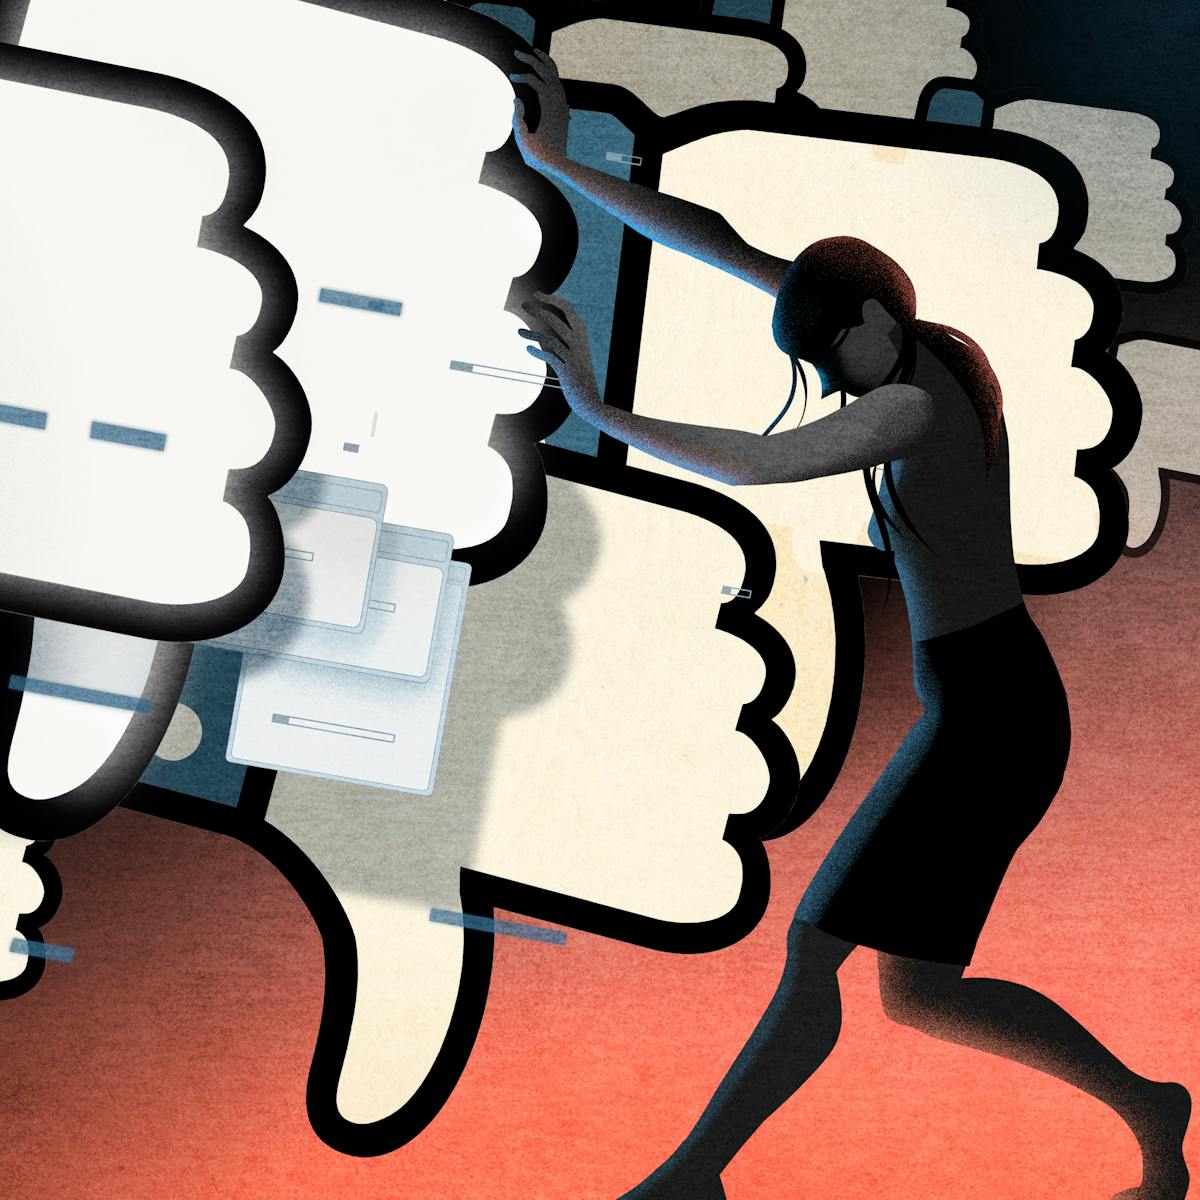 Illustration of a full length female figure on the right hand side who is bracing herself against a raft of large 'thumbs down' computer internet graphics which are all bearing down on her. In amongst the 'thumbs down' are small computer dialogue boxes and loading progress bars. The hues of the illustration are muted reds, blues and whites.